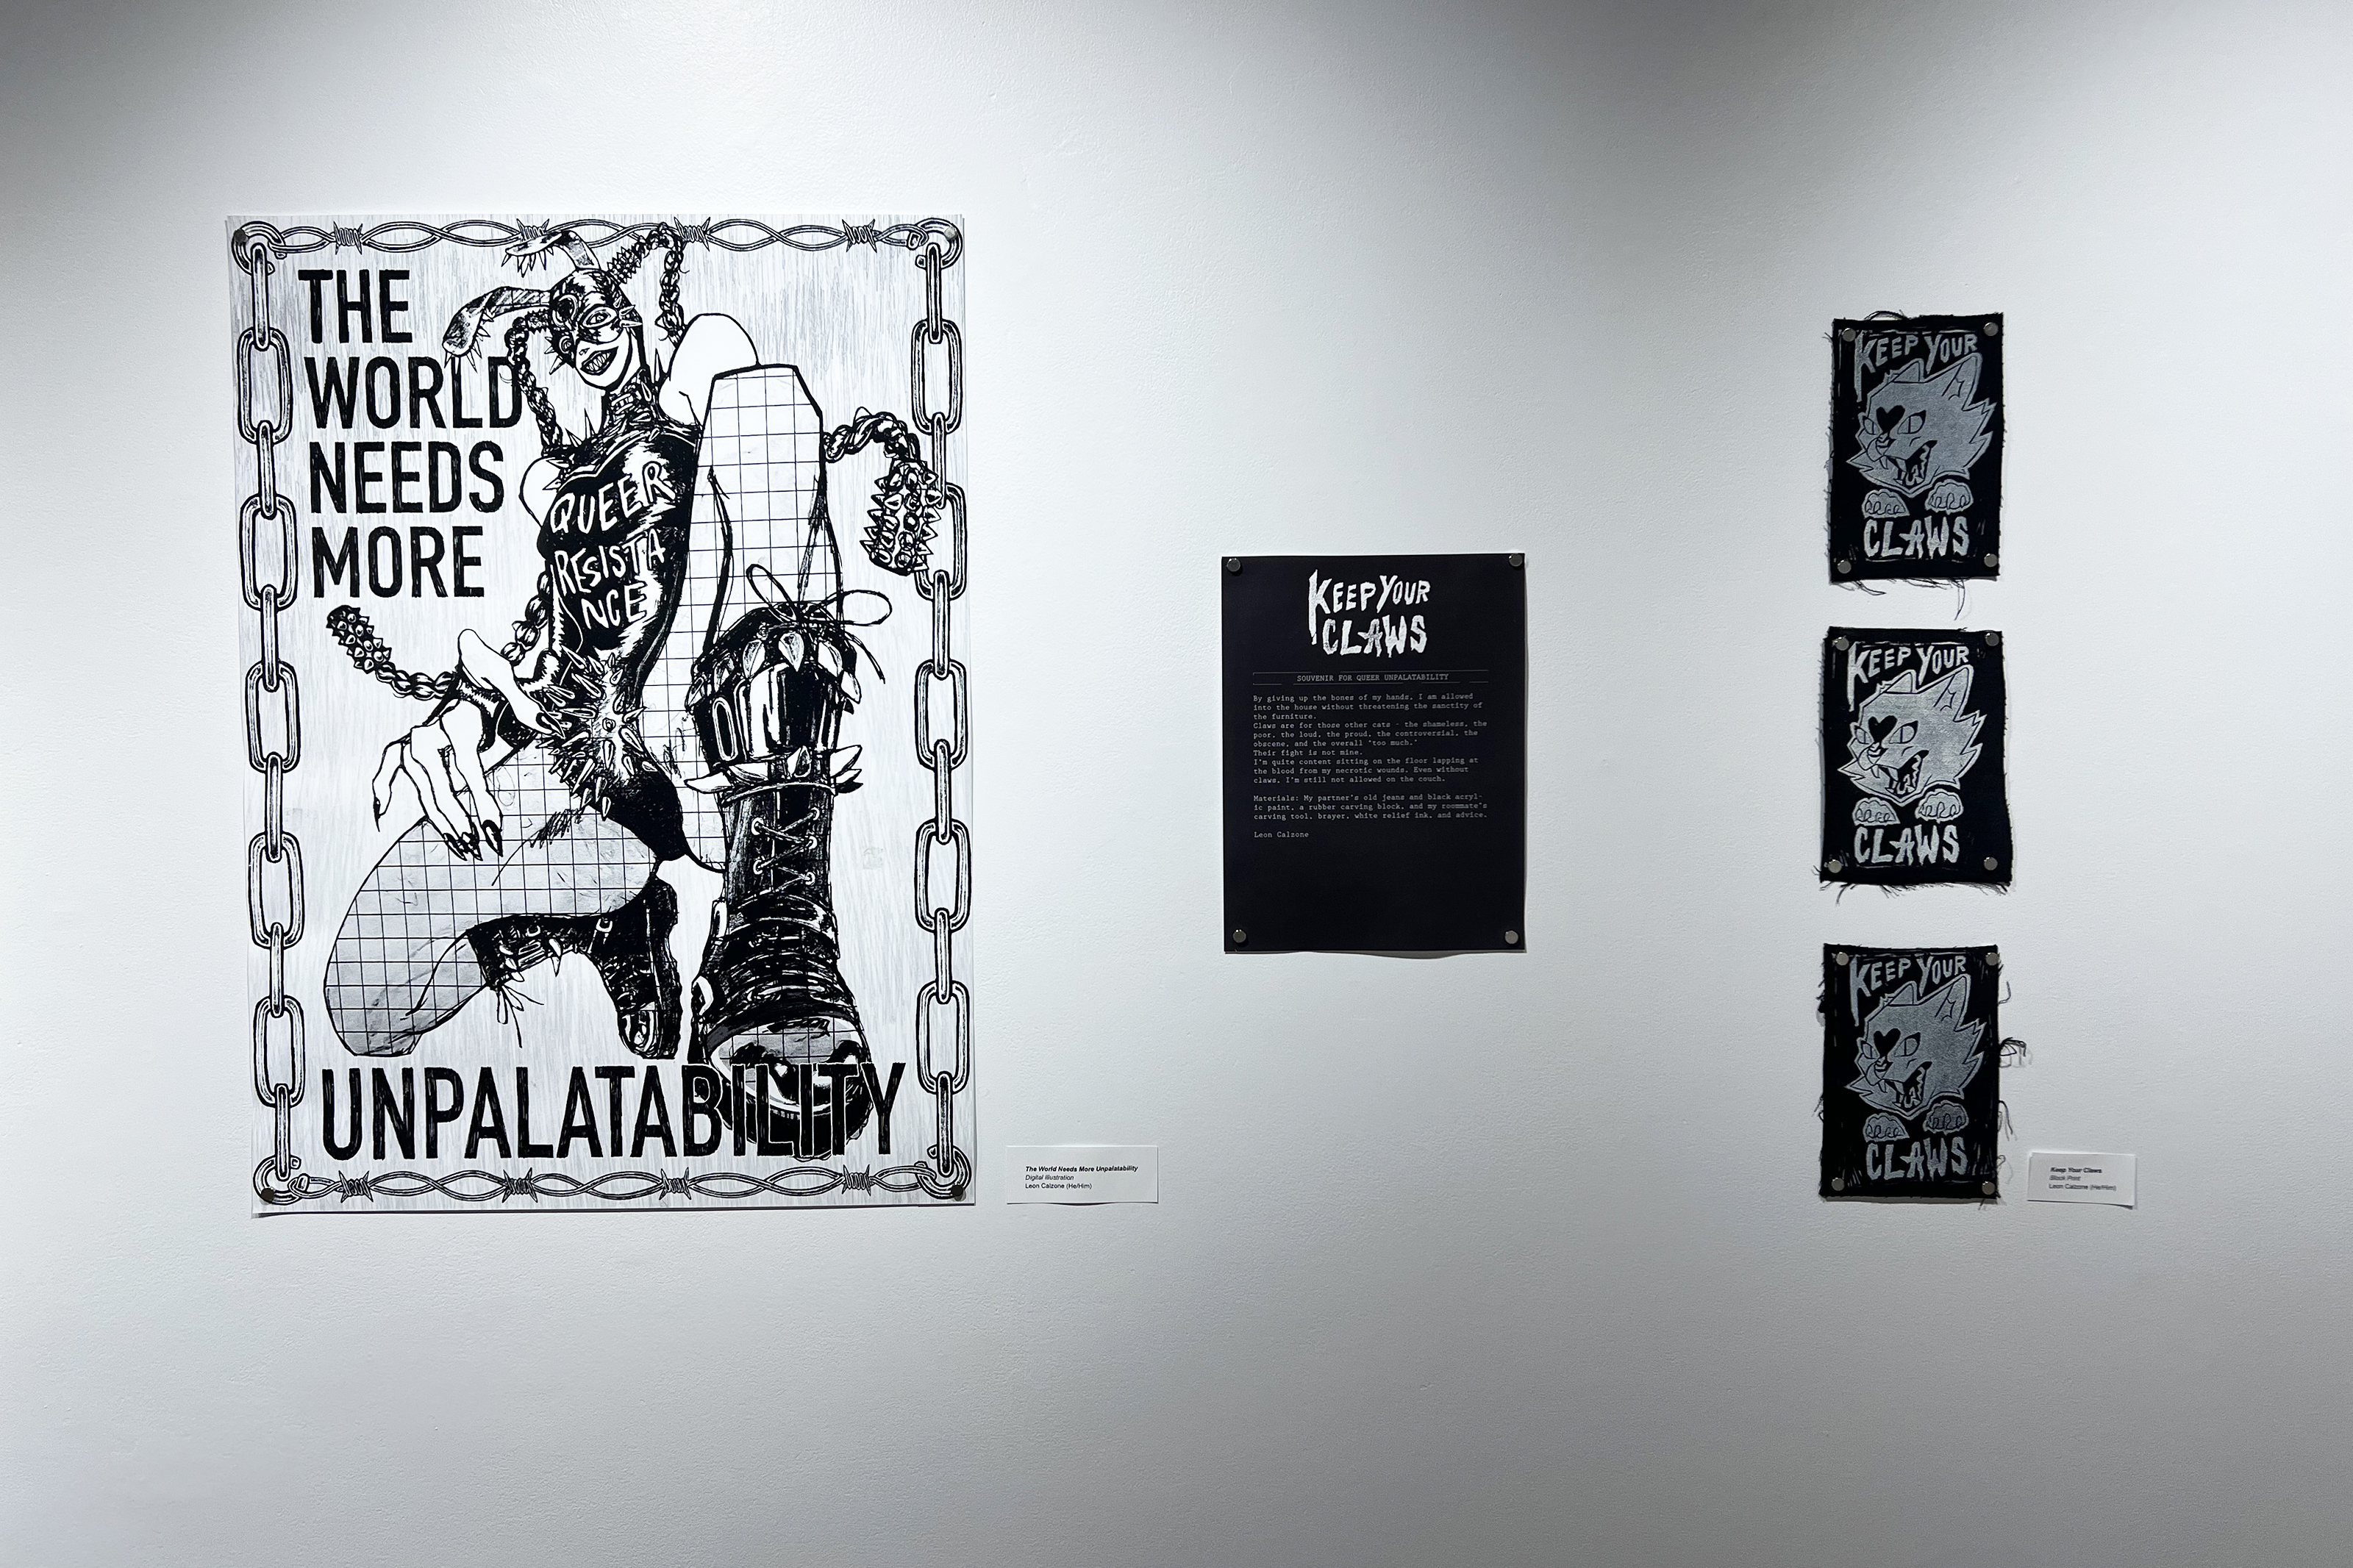 A Black and white print that says "the world needs more unpalatability" by Leon Calzone hangs in the isb gallery